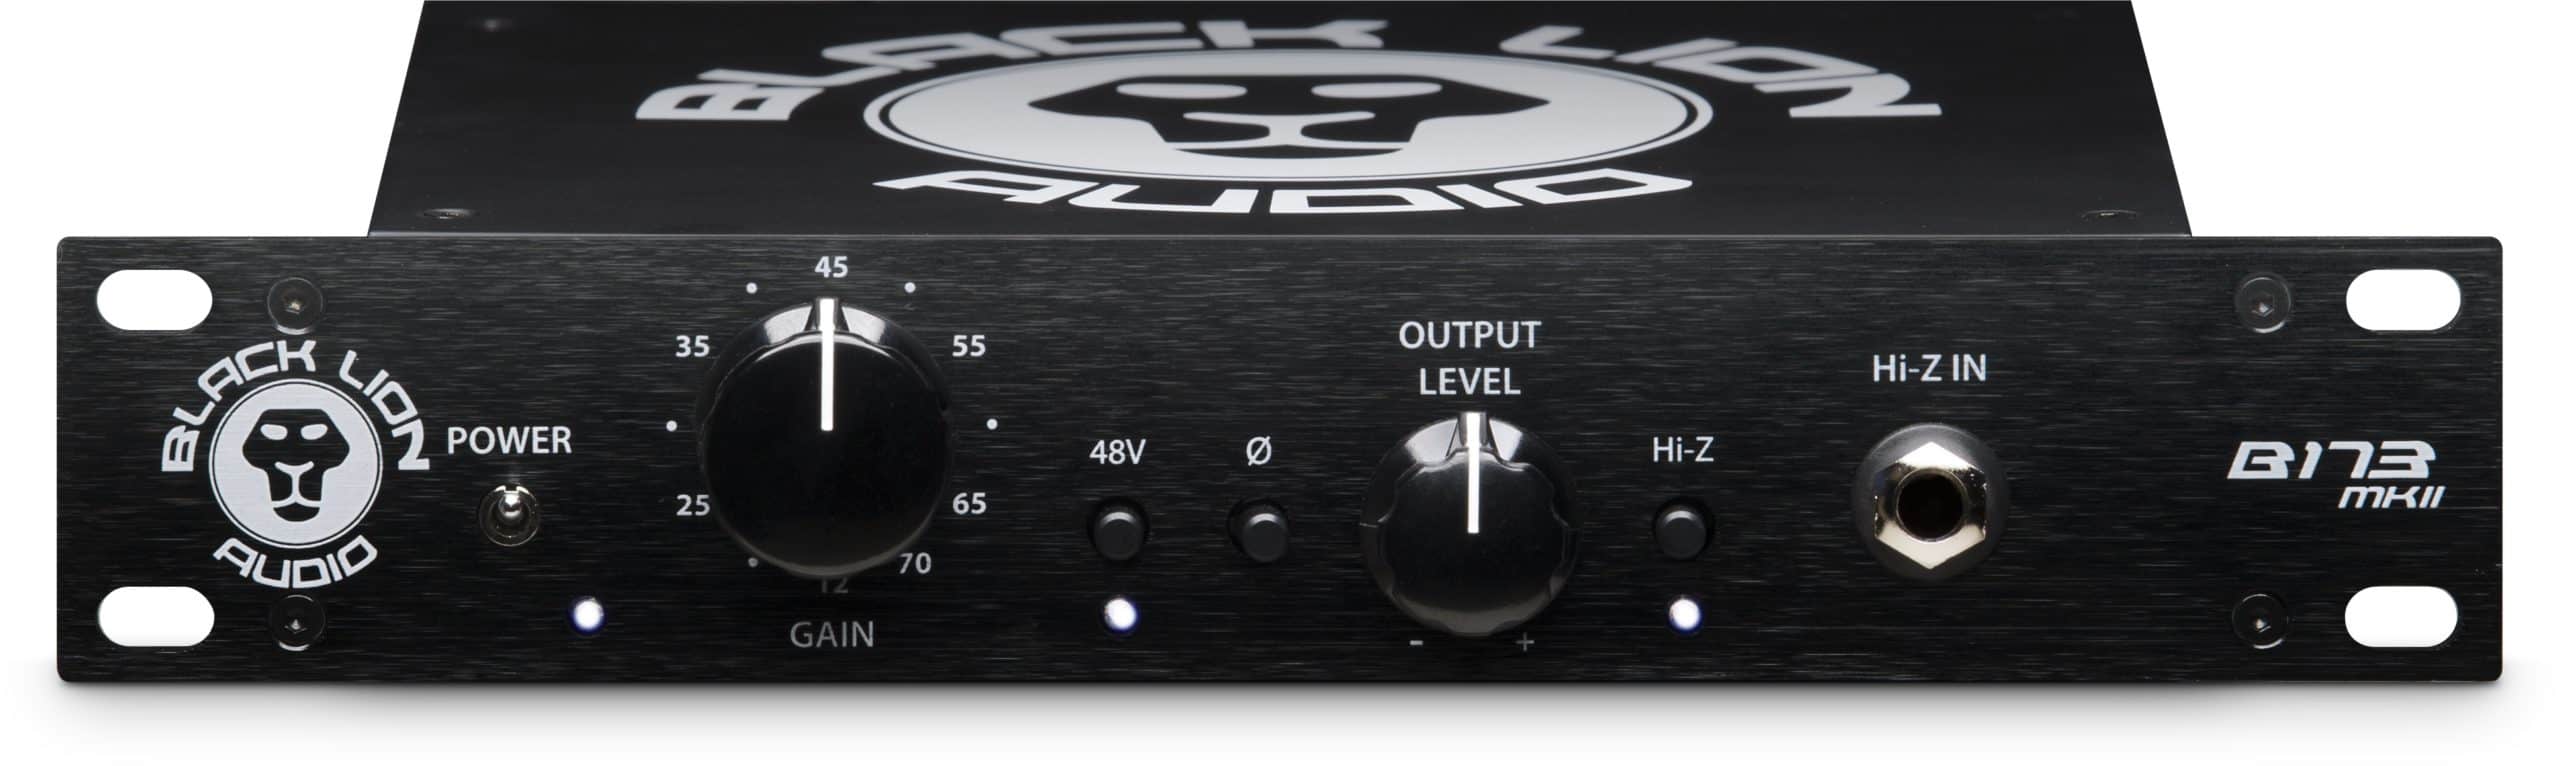 Black Lion Audio Releases  British-style B173 mkII and American-style B12A MkIII Pre-Amps